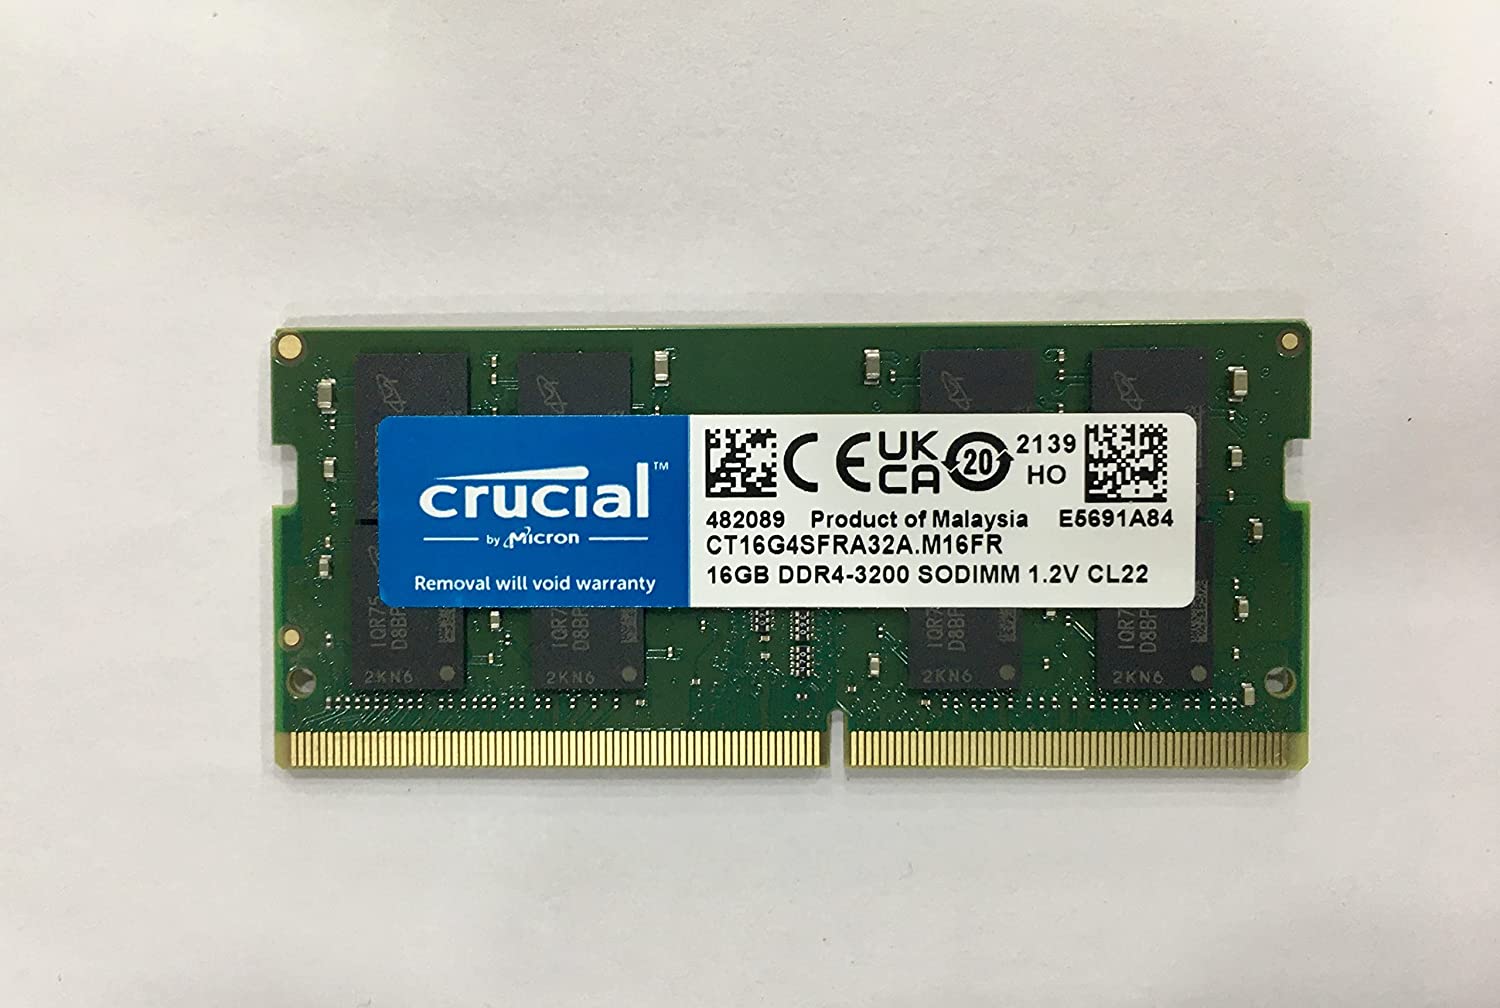 Crucial RAM 16GB DDR4 3200MHz CL22 (or 2933MHz or 2666MHz) Laptop Memory  CT16G4SFD832A at